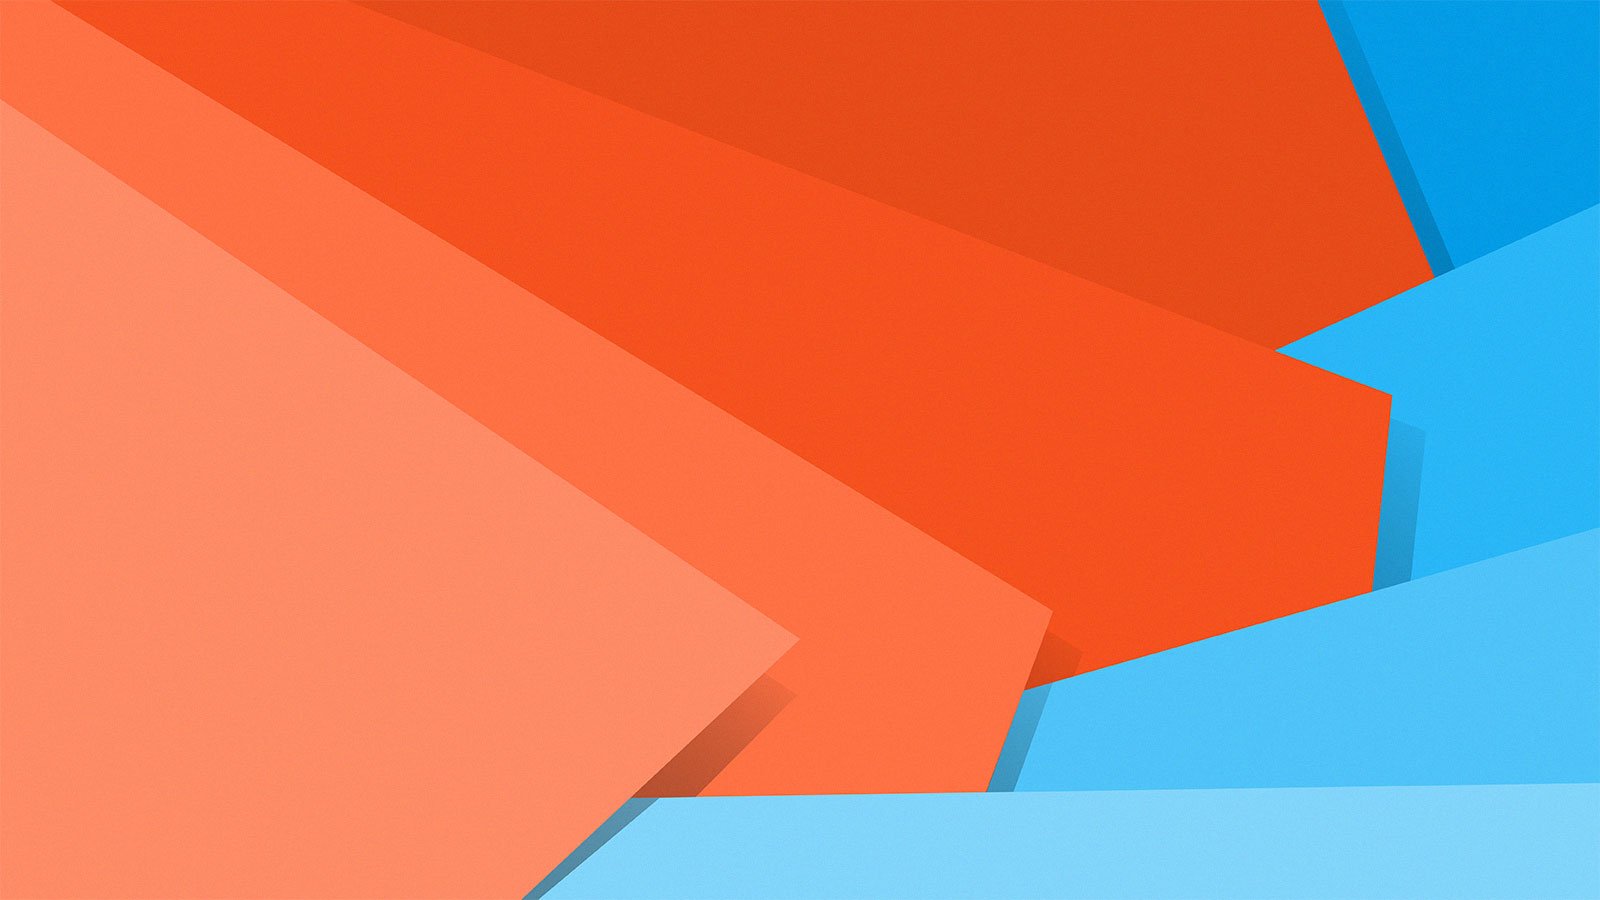 Brand New Set Of 40 Material Design Backgrounds   Oxygenna Web Design 1600x900